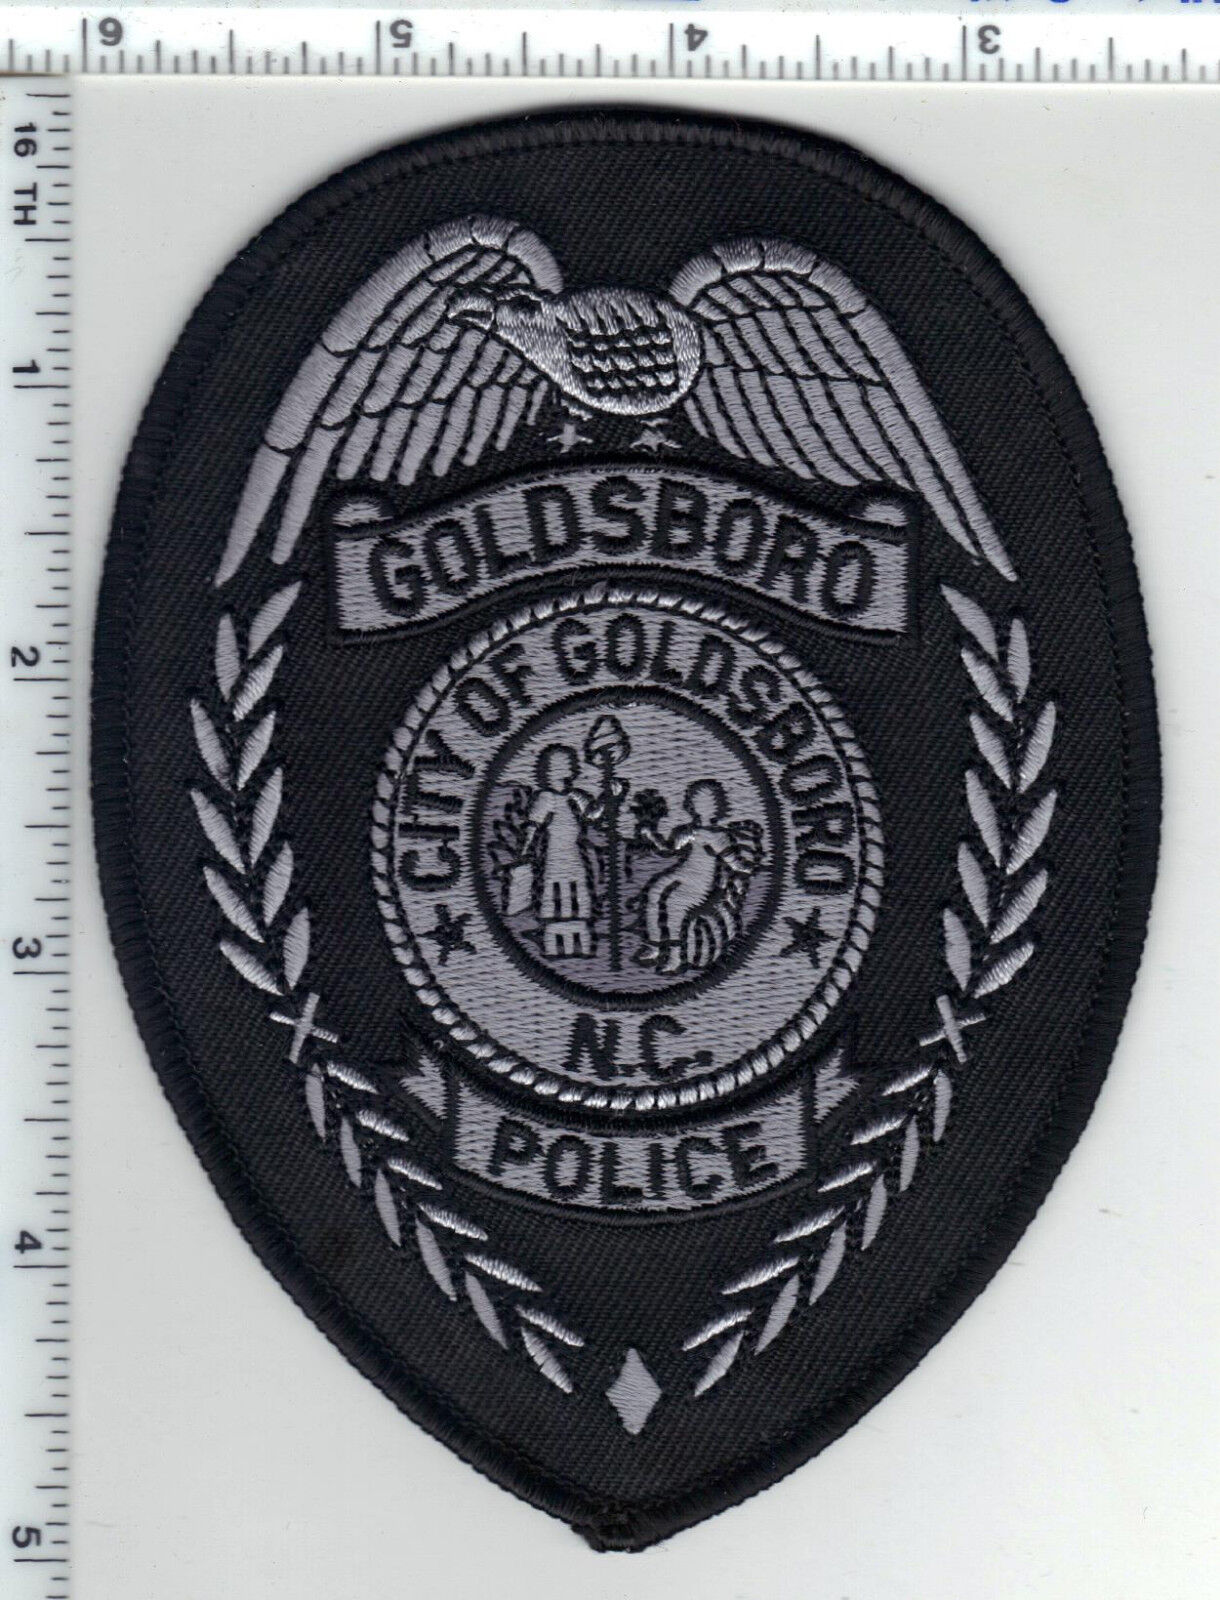 Goldsboro Police (North Carolina) Subdued Shoulder Patch from the 1980\'s